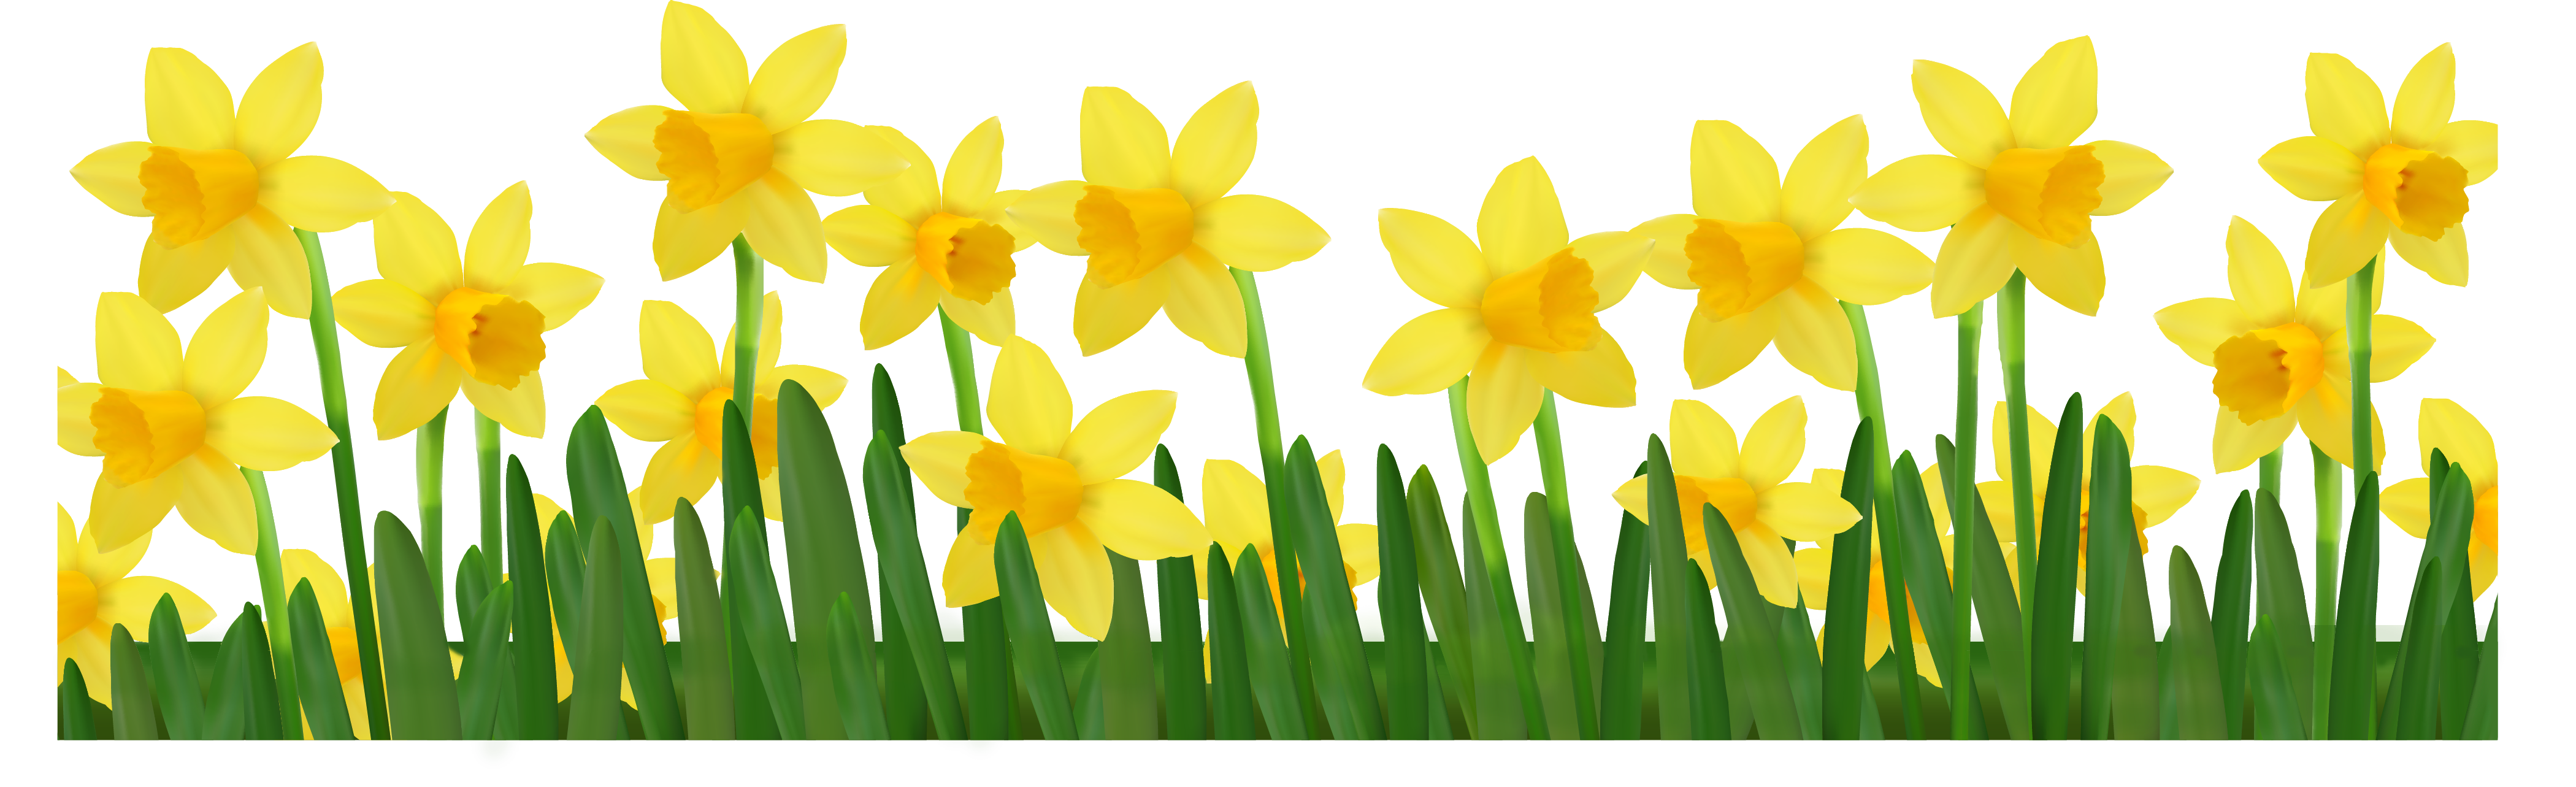 Grass with Daffodils PNG Clipart Picture